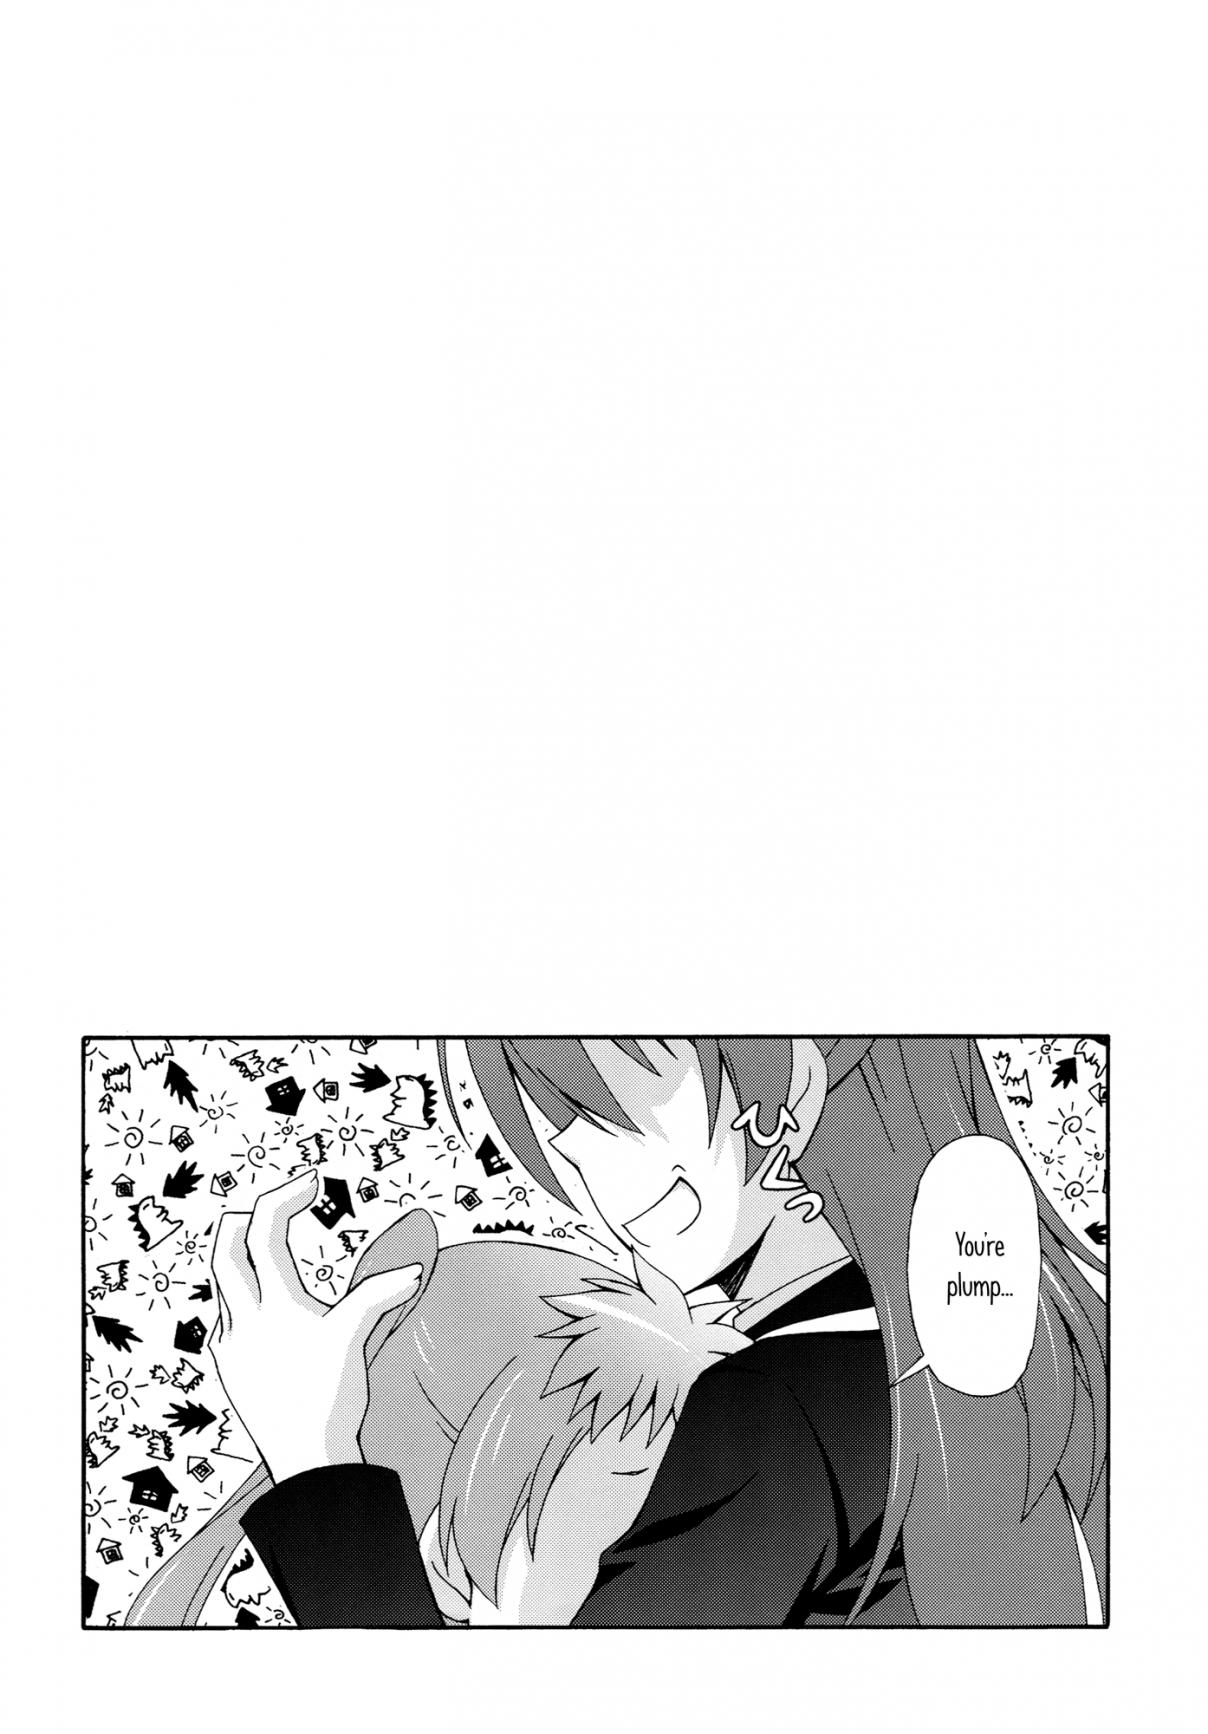 Chuunibyou Demo Koi ga Shitai! I Used To Have Eighth Grade Sickness, But It Doesn’t Matter Since I’m Over It Now (Doujinshi) Oneshot